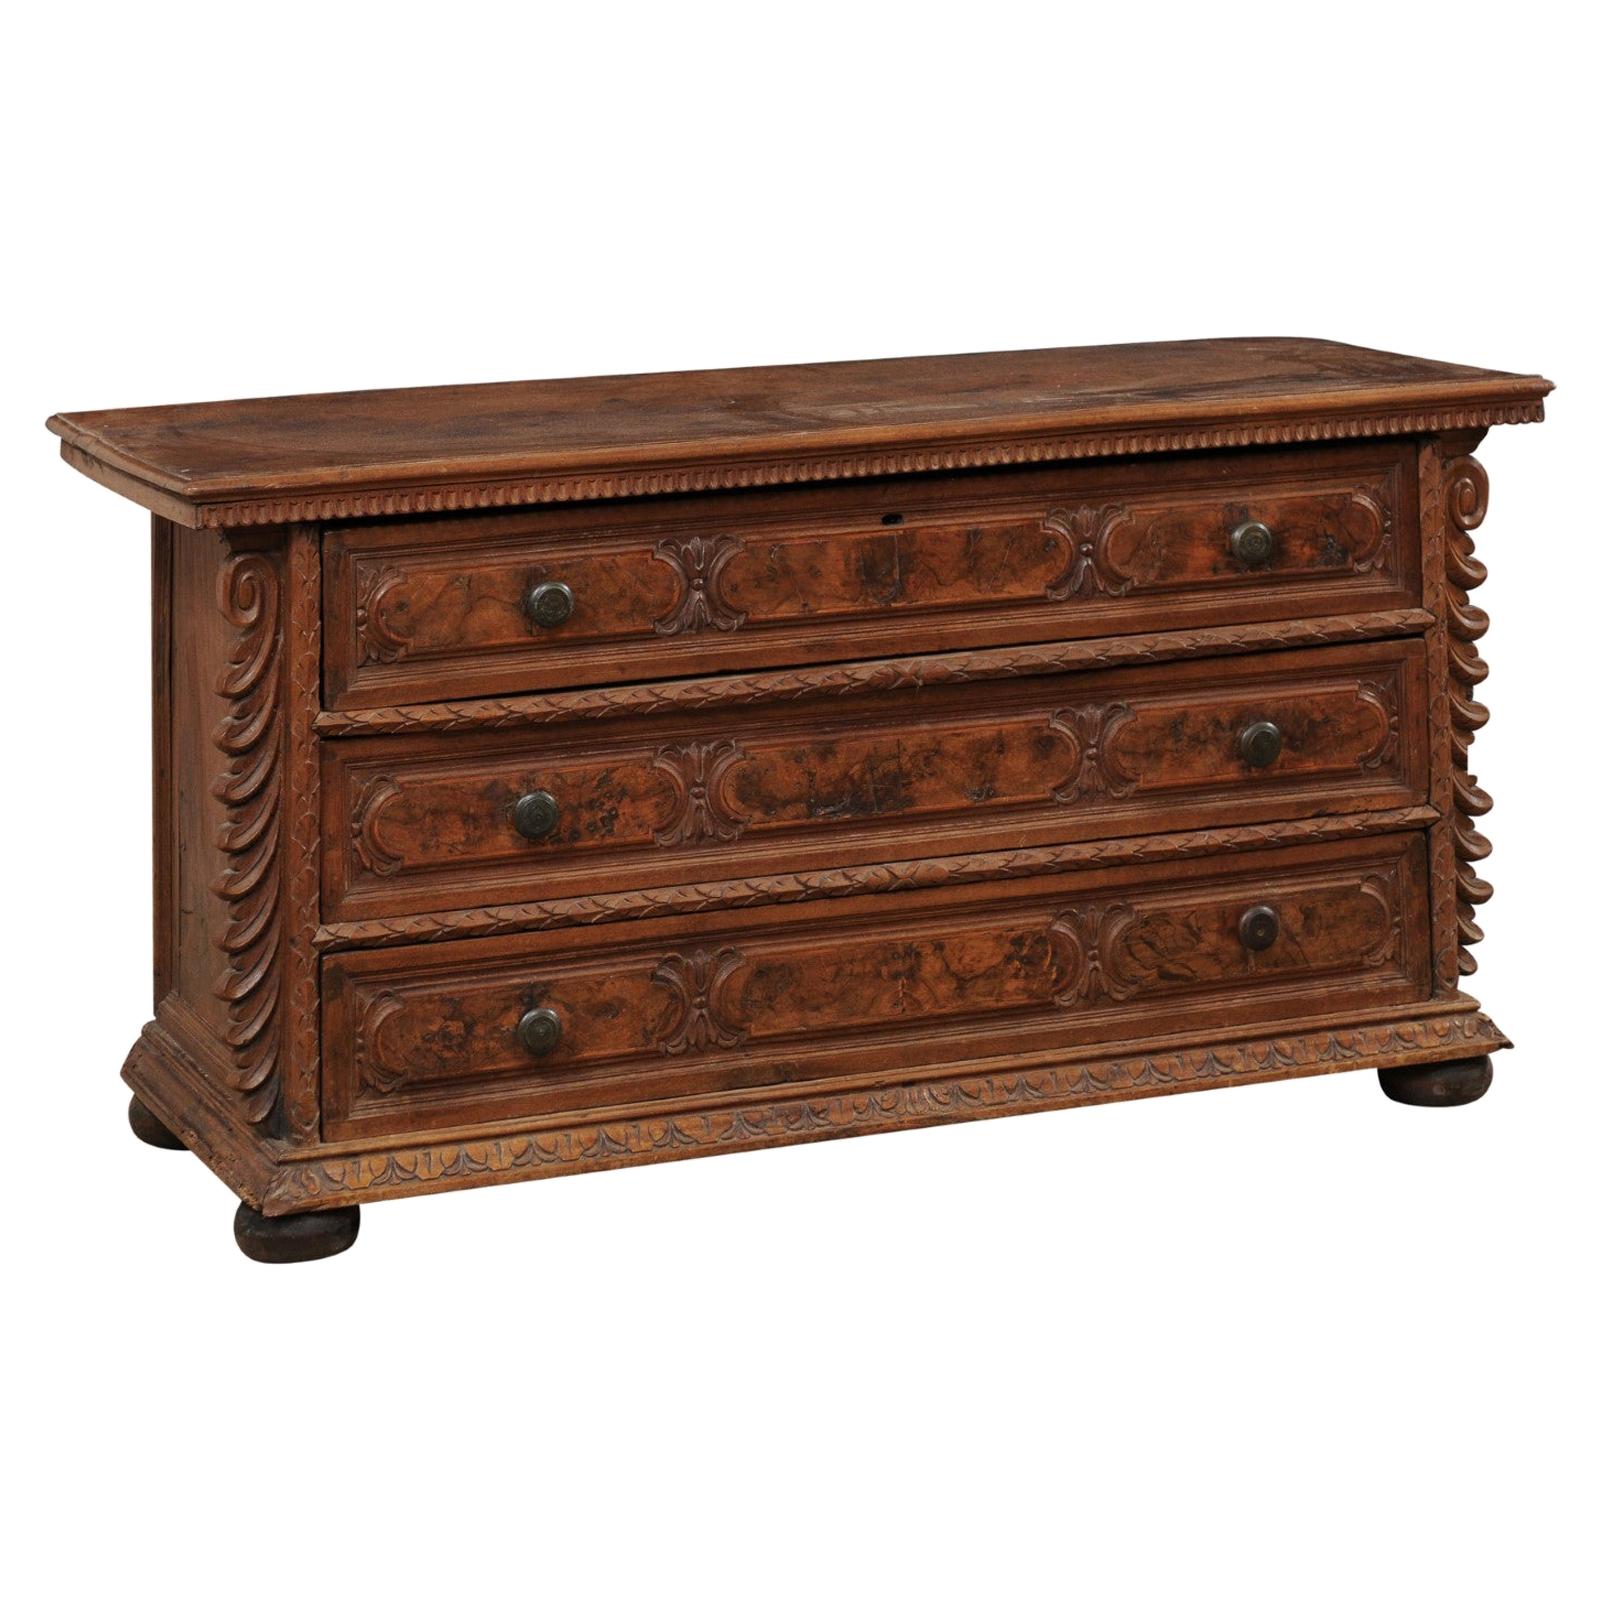 Fabulous Italian Early 18th C. Walnut Chest of Drawers Beautifully Carved